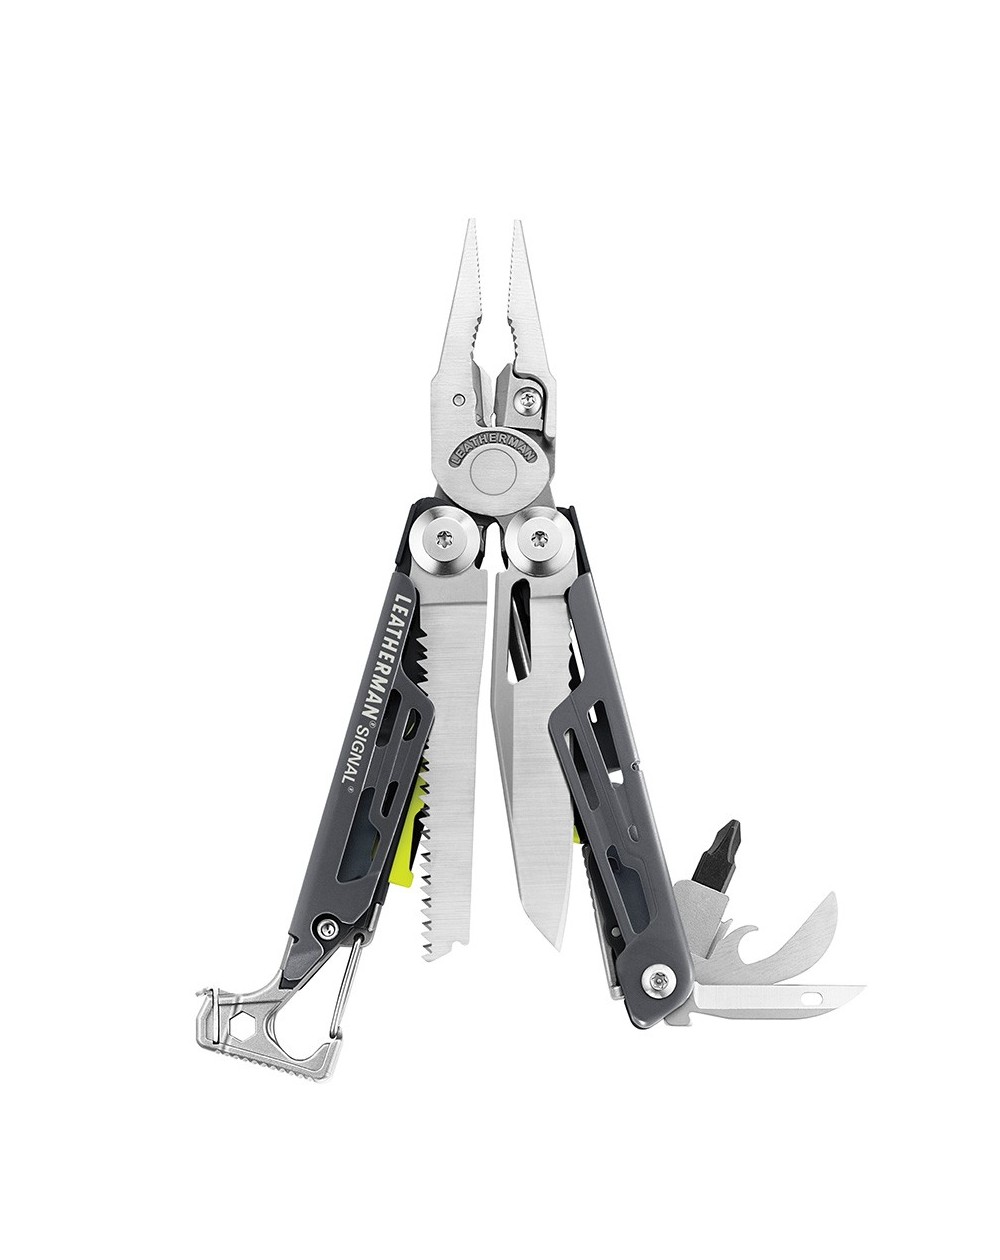 leatherman-pince-multifonctions-signal-gris-832737-1